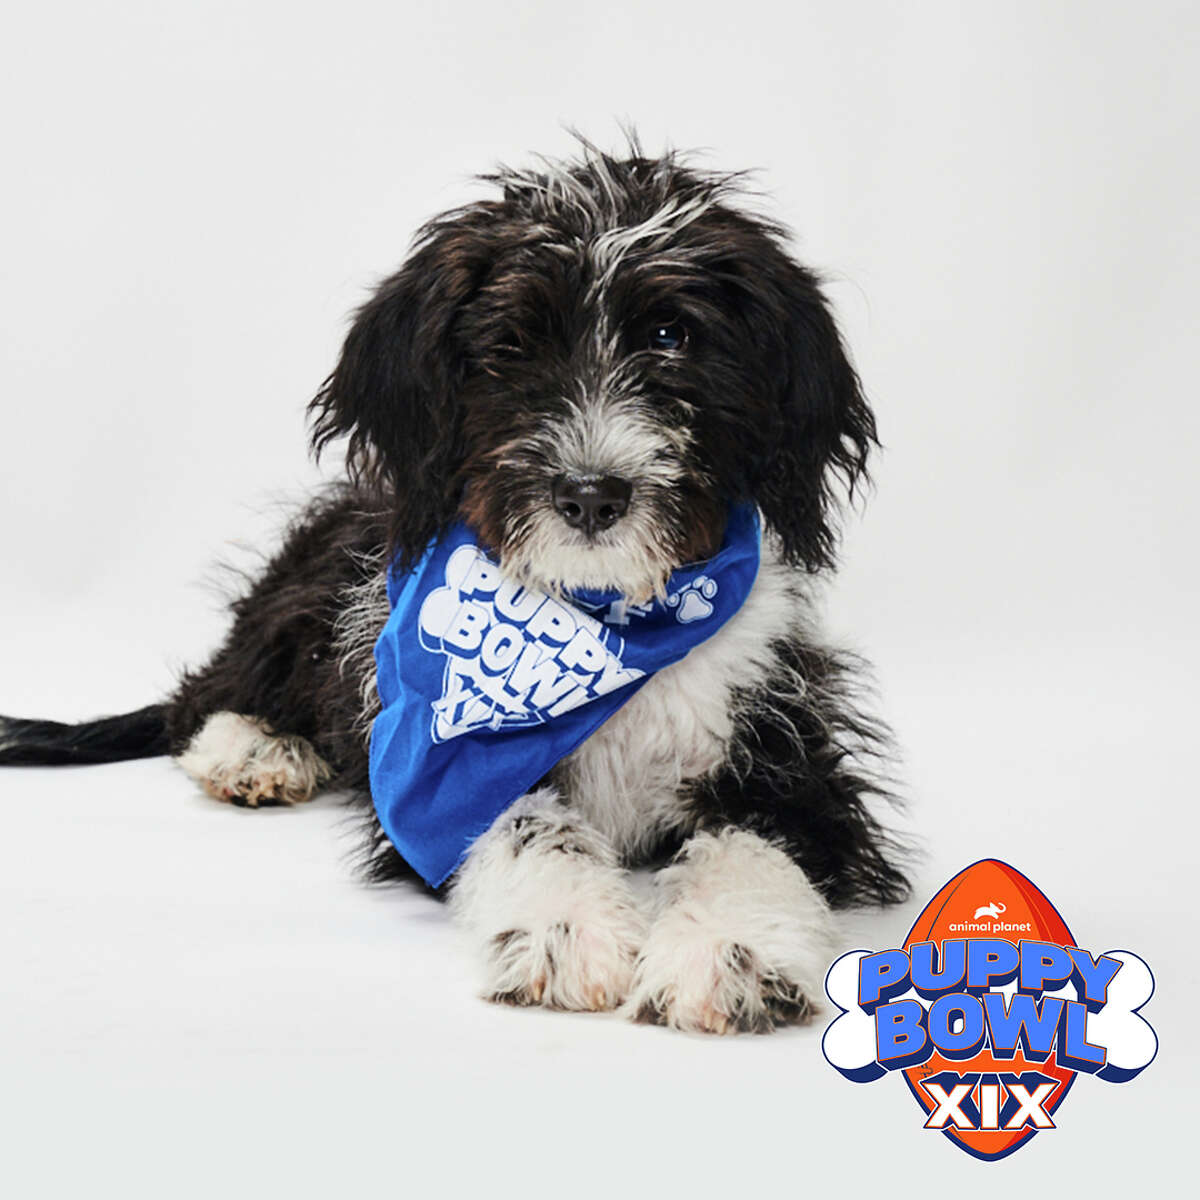 Stardust from the Danbury Animal Welfare Society will play in this year's Puppy Bowl on Sunday, Feb. 12.